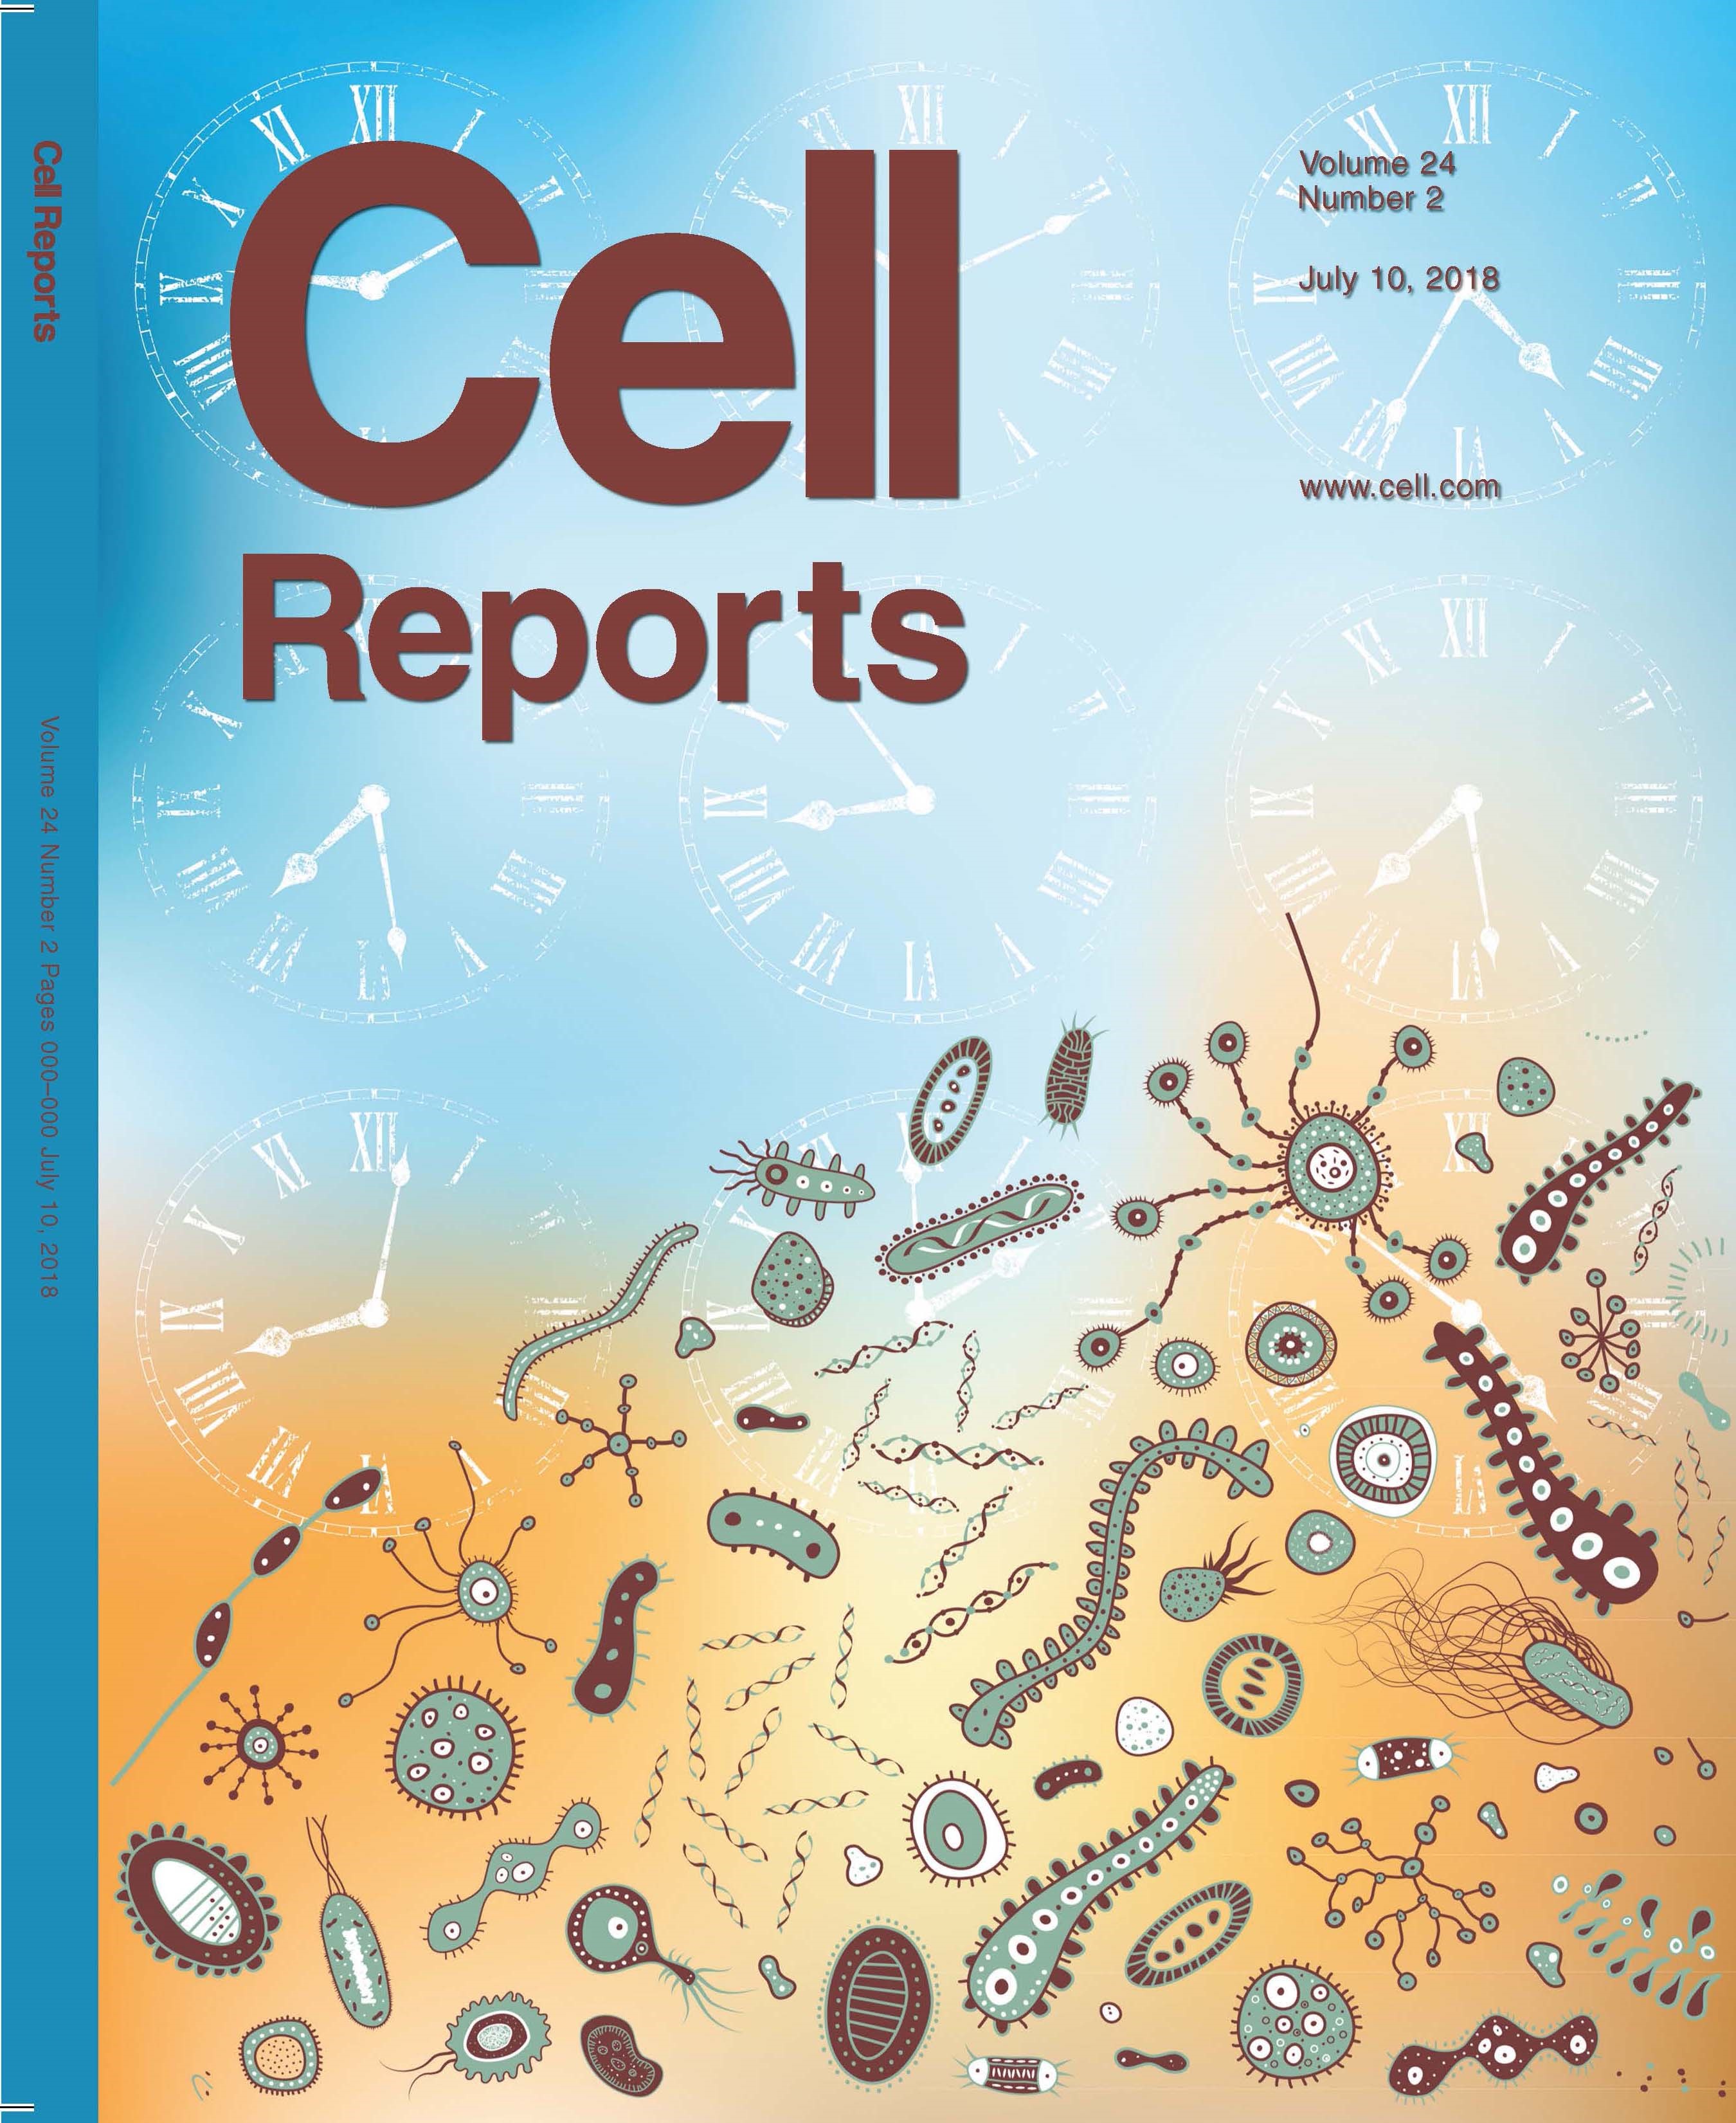 Paper by Researchers Selected for Cover of Cell Reports | Department of Surgery | University of